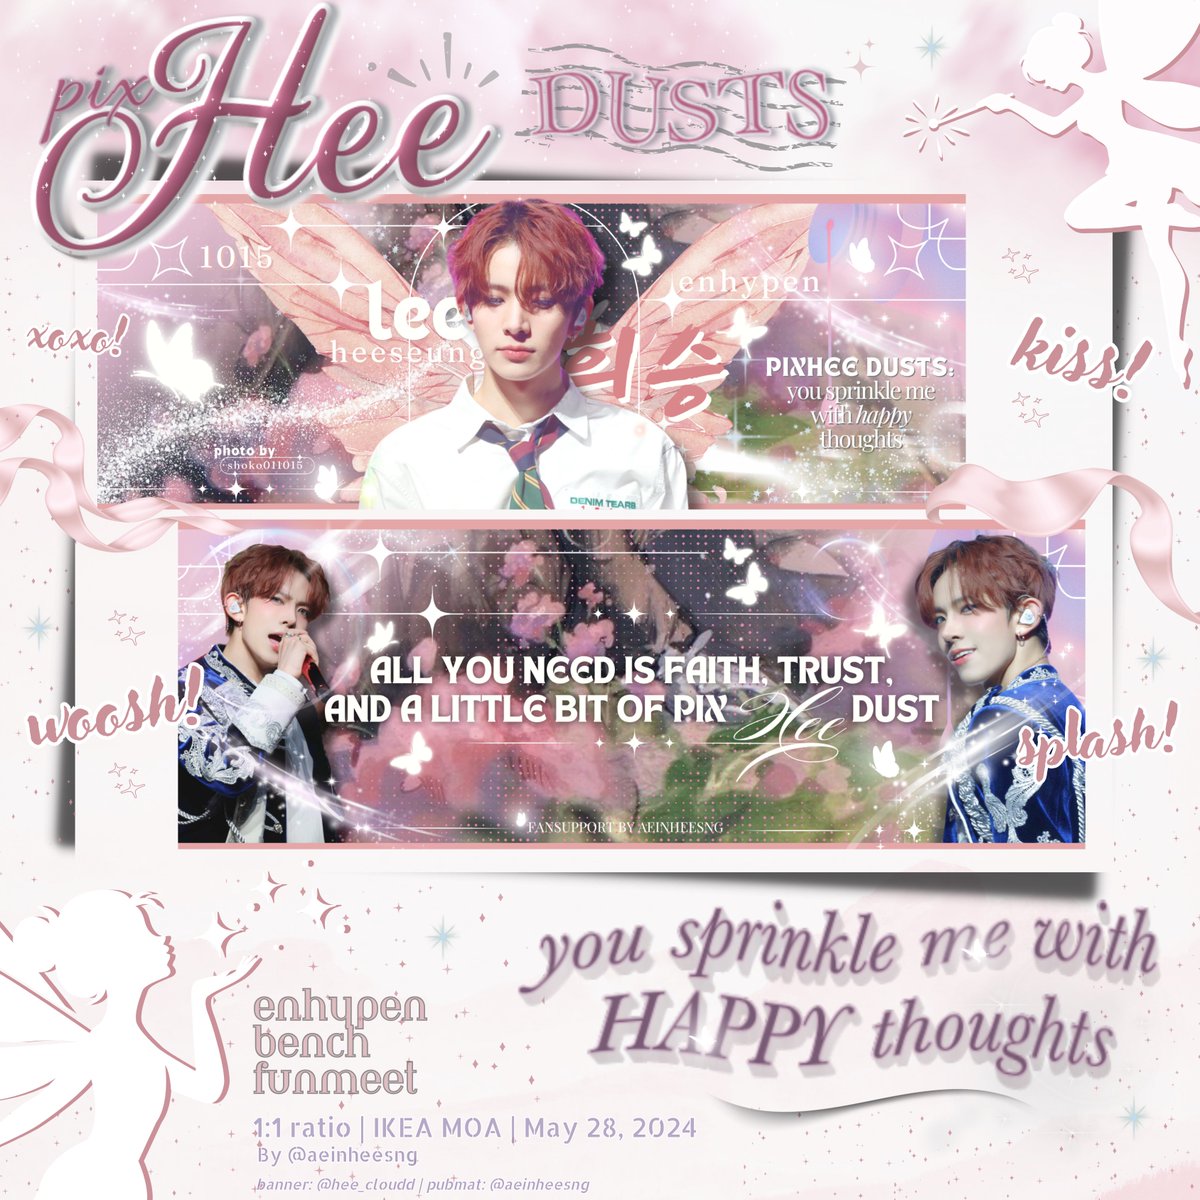 ₊ ⊹ 𝒑𝒊𝒙𝑯𝑬𝑬 𝒅𝒖𝒔𝒕𝒔 ✨
𝚢𝚘𝚞 𝚜𝚙𝚛𝚒𝚗𝚔𝚕𝚎 𝚖𝚎 𝚠𝚒𝚝𝚑 𝚑𝚊𝚙𝚙𝚢 𝚝𝚑𝚘𝚞𝚐𝚑𝚝𝚜 !

for #𝐇𝐄𝐄𝐒𝐄𝐔𝐍𝐆 
— a fan support by @aeinheesng 

☘︎ strictly 1:1
☘︎ v limited qty
☘︎ like and rt

see you there! 🌸🧚🏻‍♀️

#BENCHandENHYPEN #ASweetExperienceWithBENCH